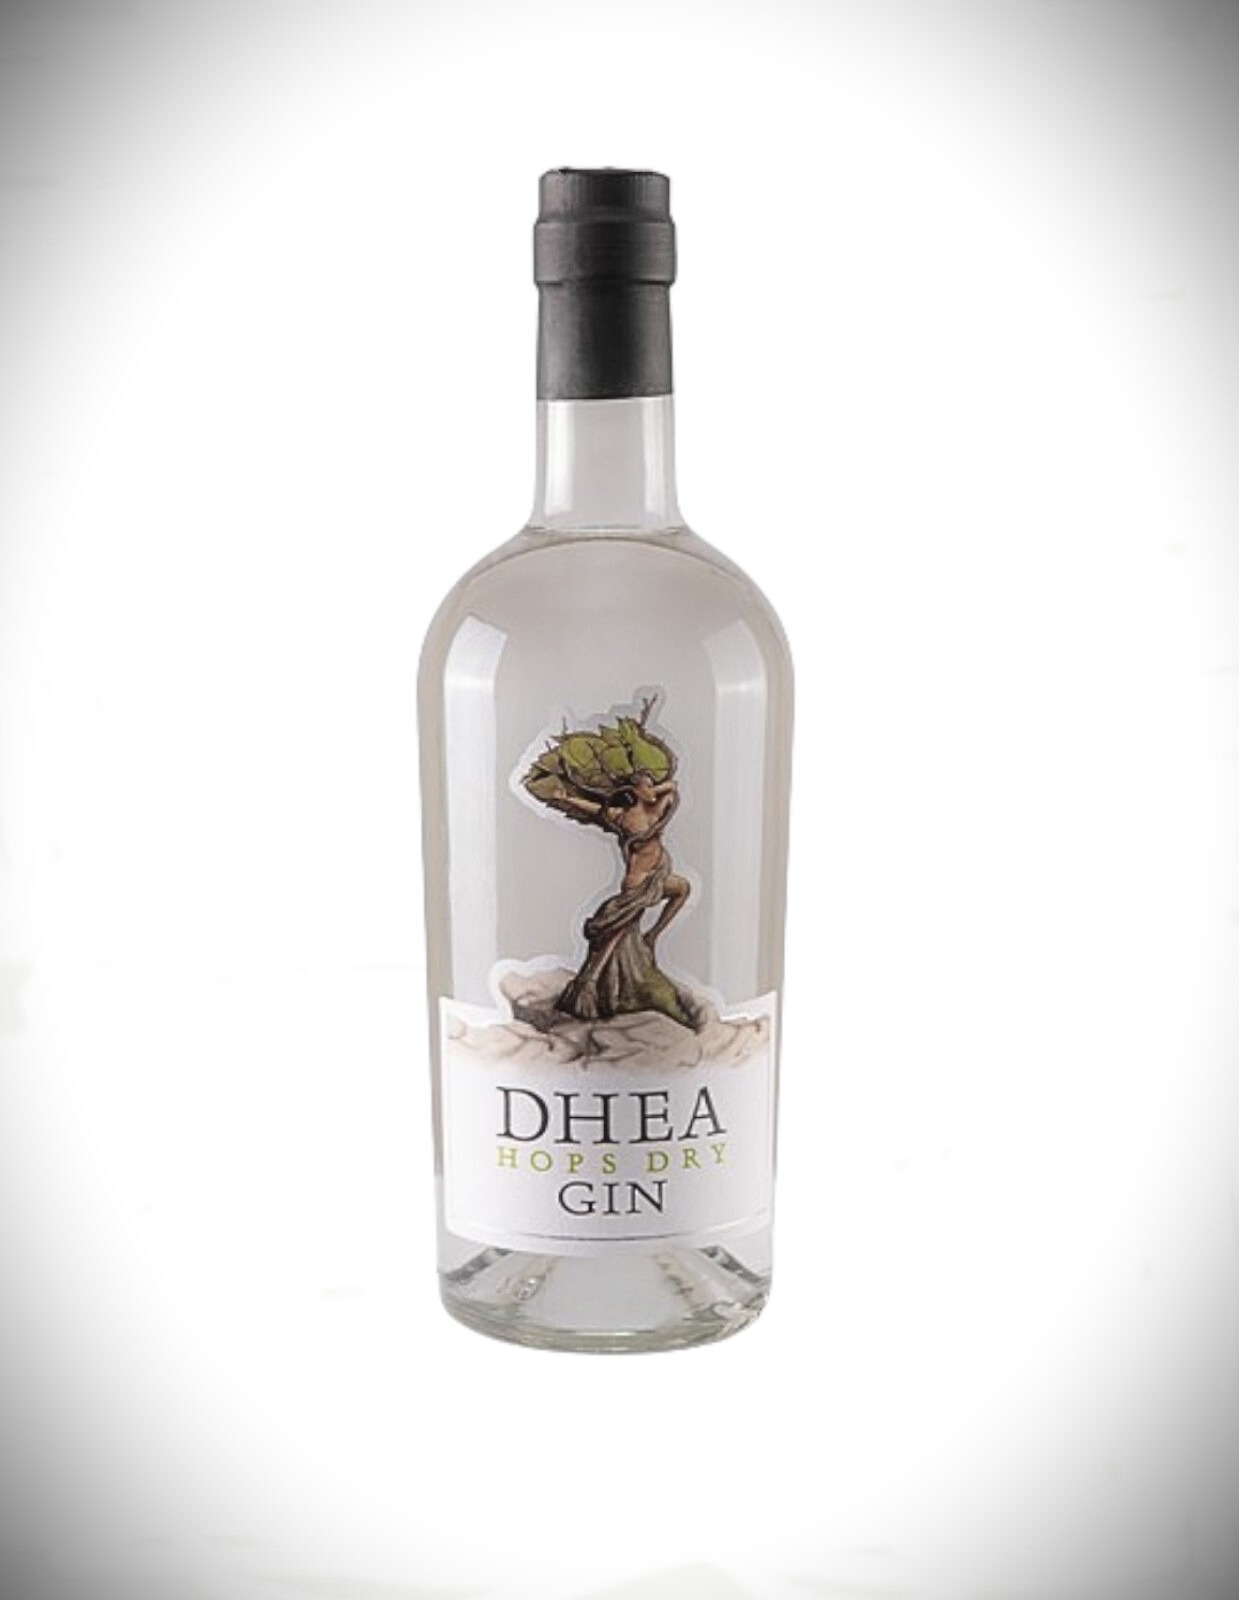 GIN DHEA HOPS DRY cl.70